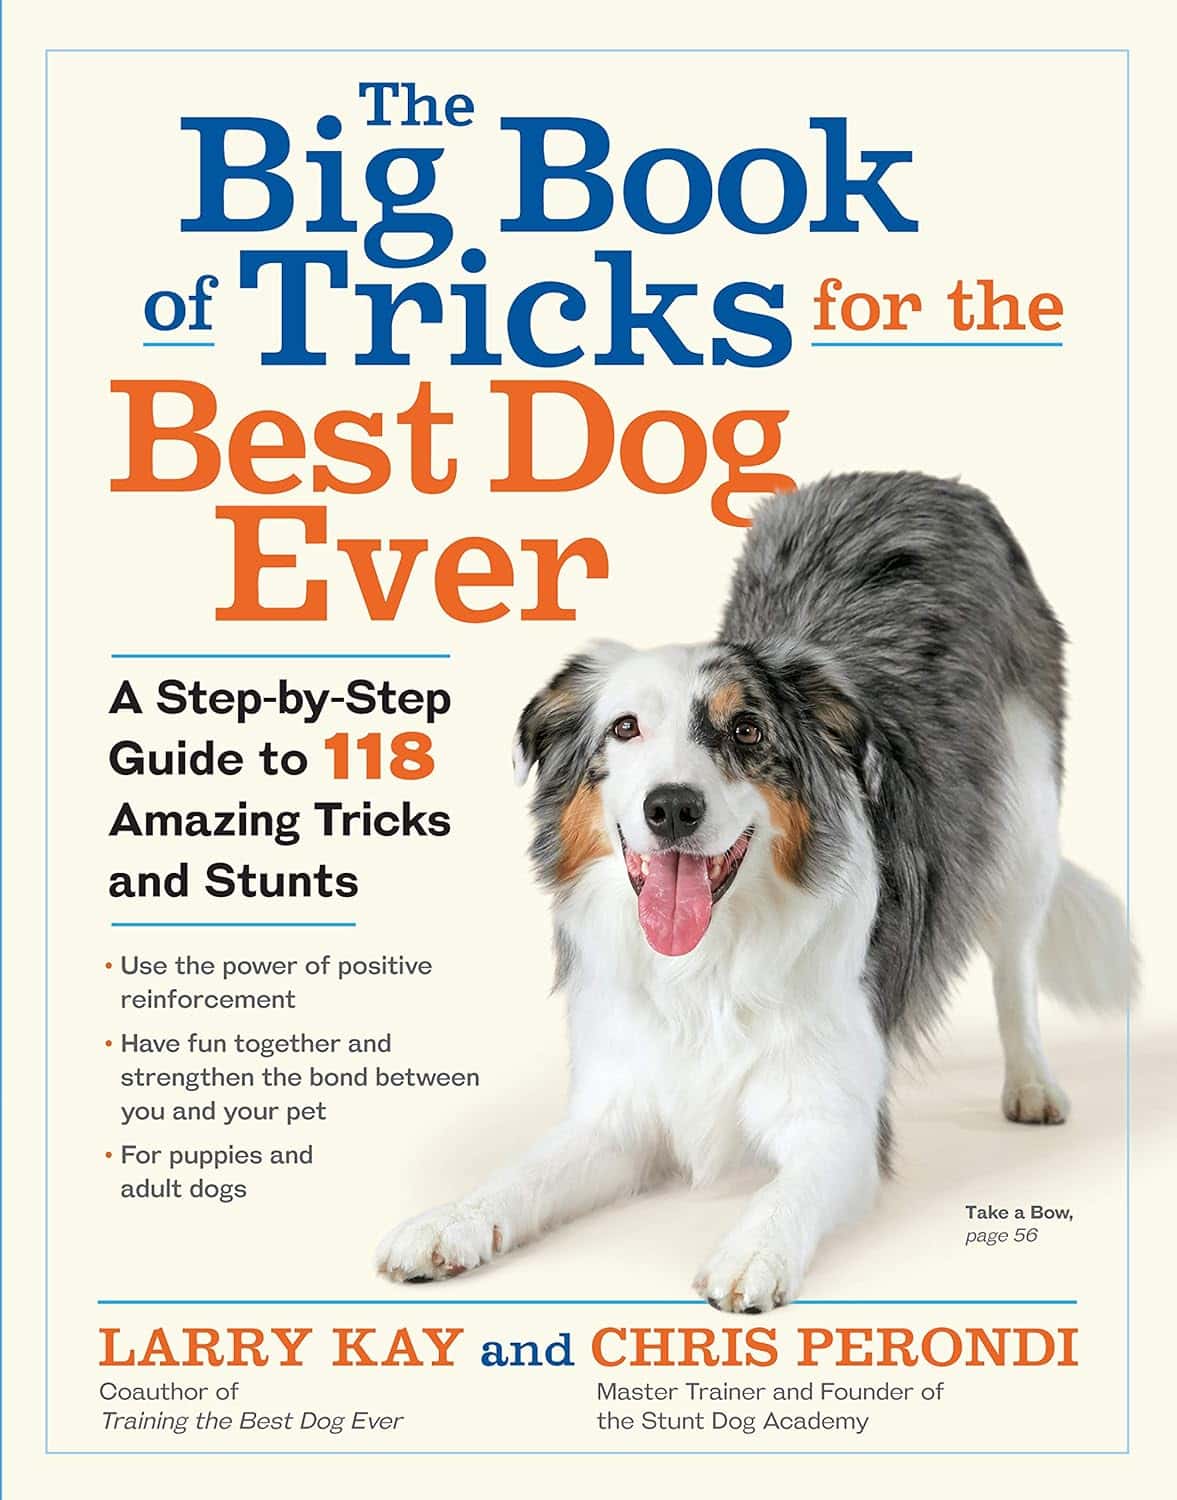 he Big Book of Tricks for the Best Dog Ever